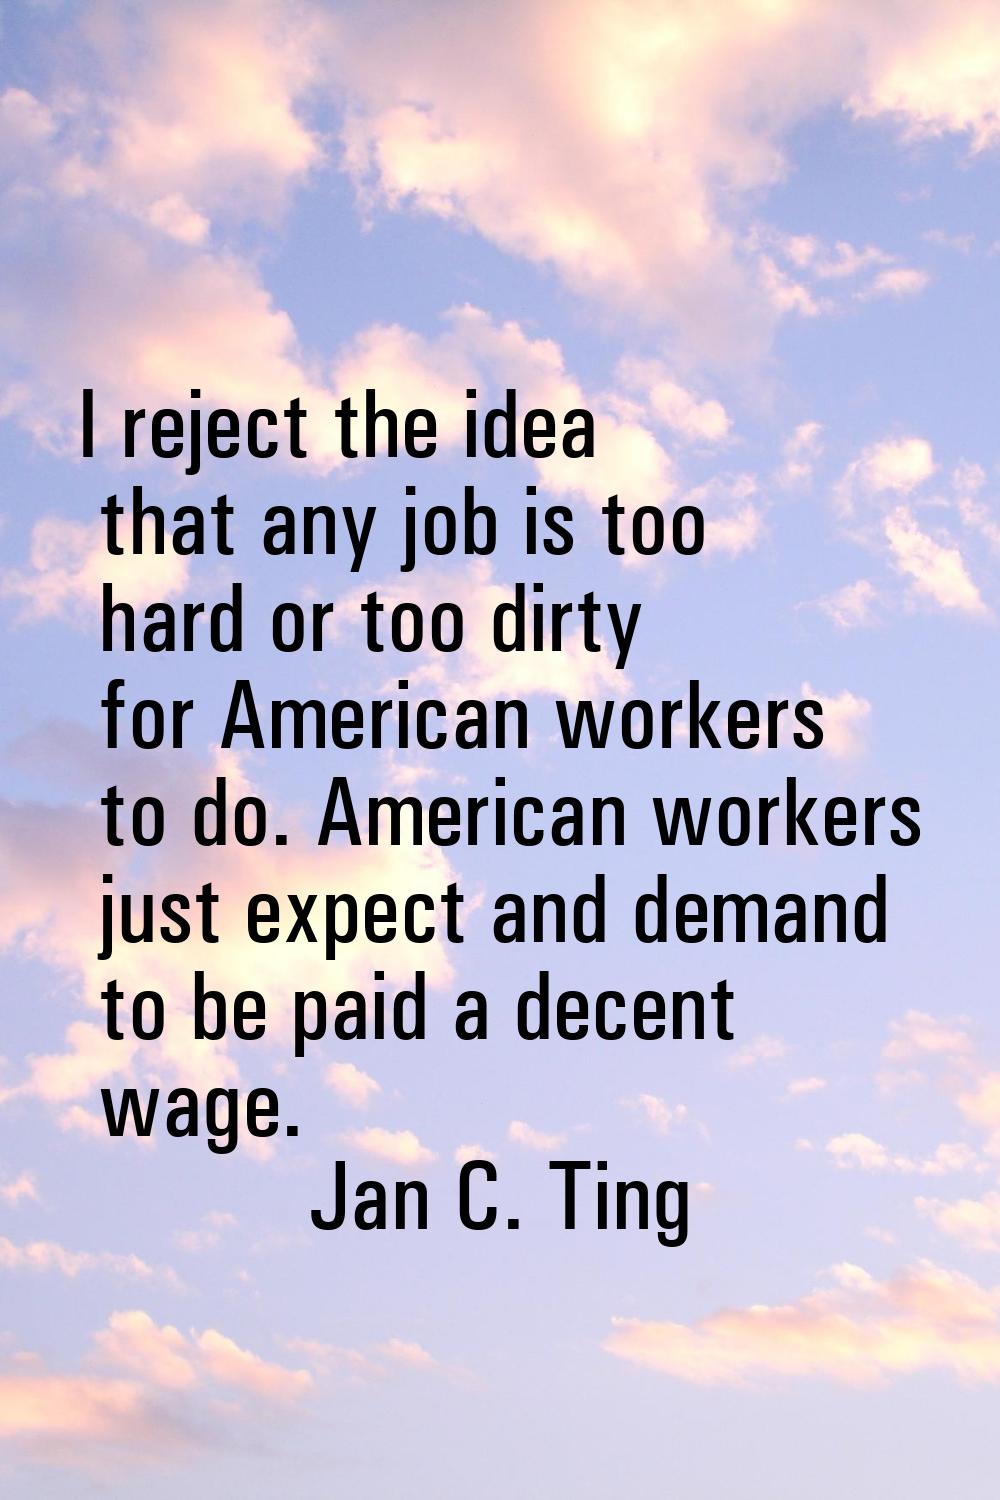 I reject the idea that any job is too hard or too dirty for American workers to do. American worker